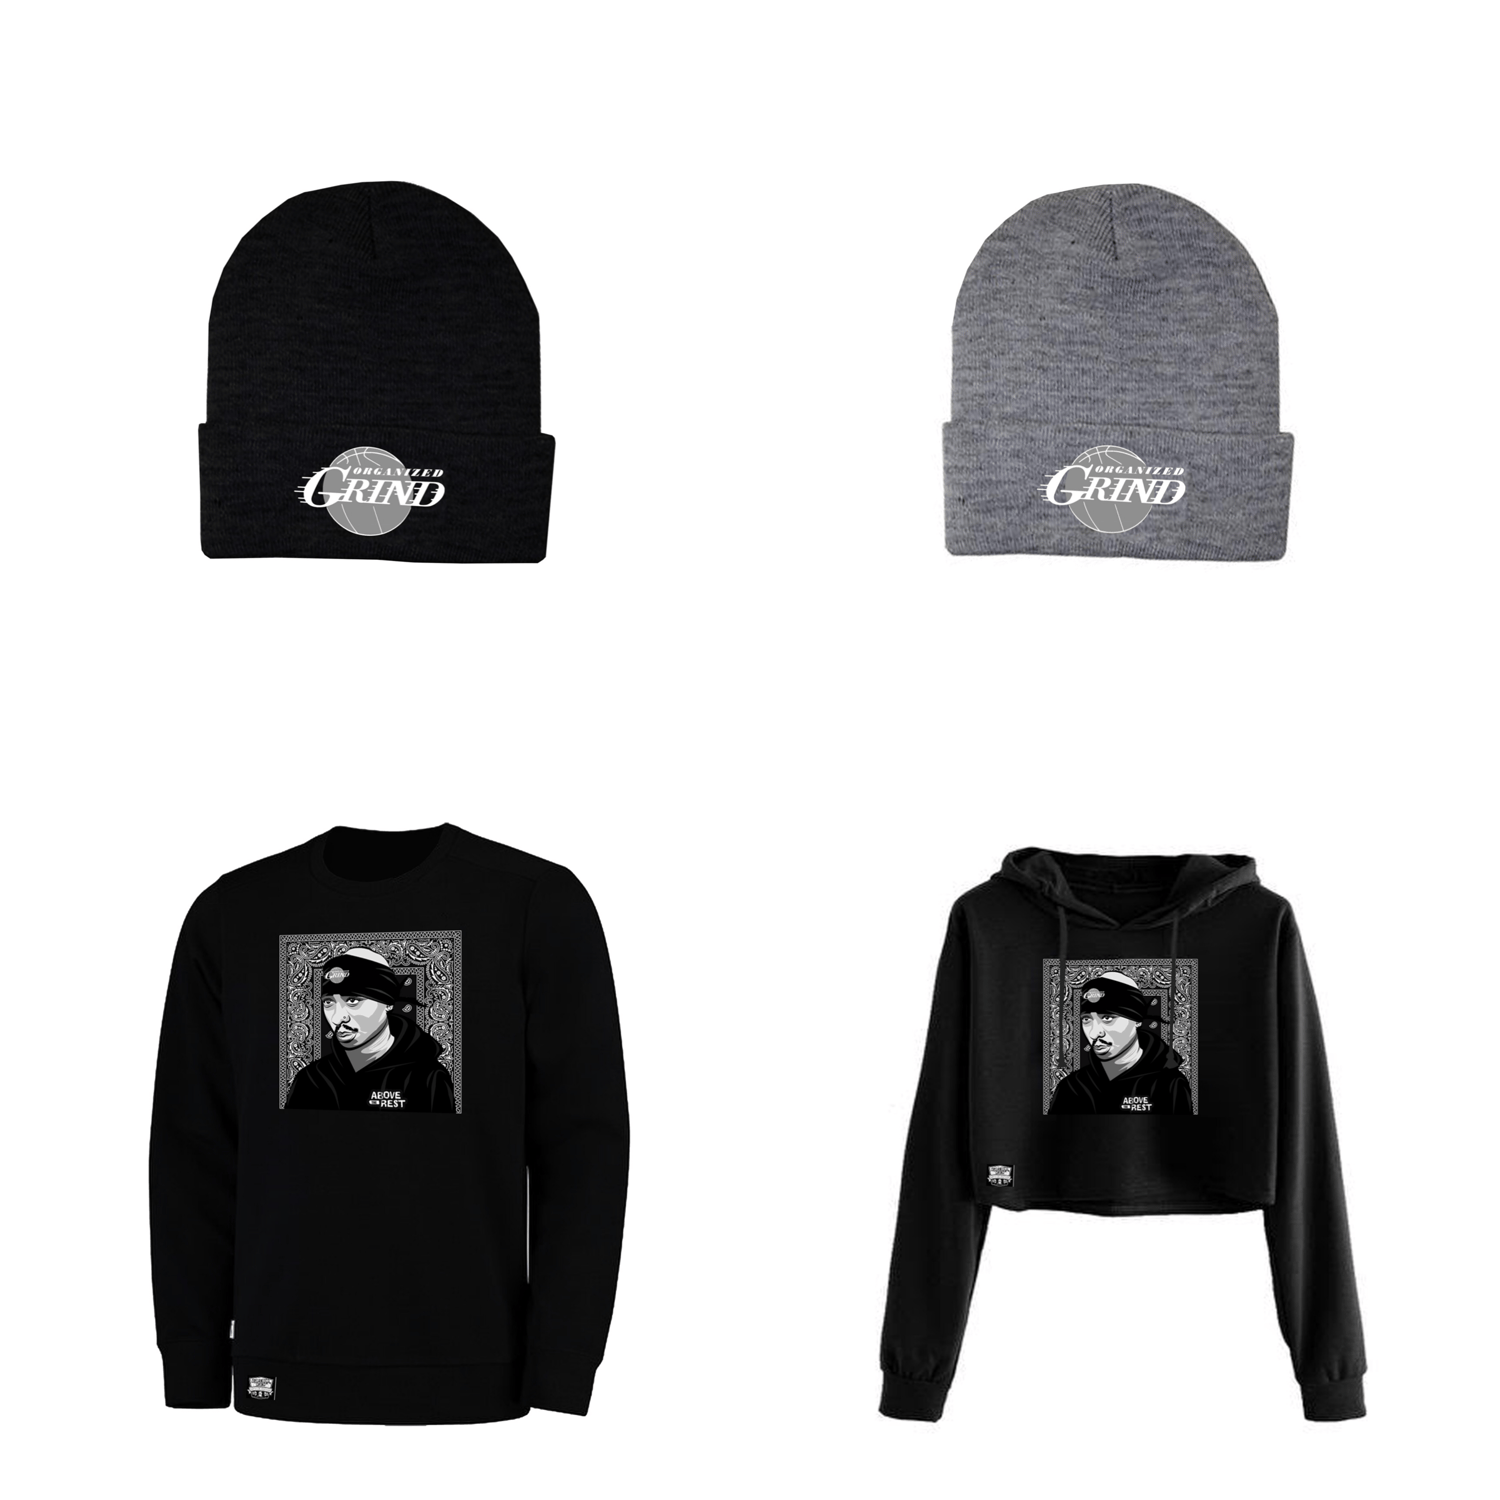 Image of 2Pac “Above The Rest” Sweaters & Beanies 